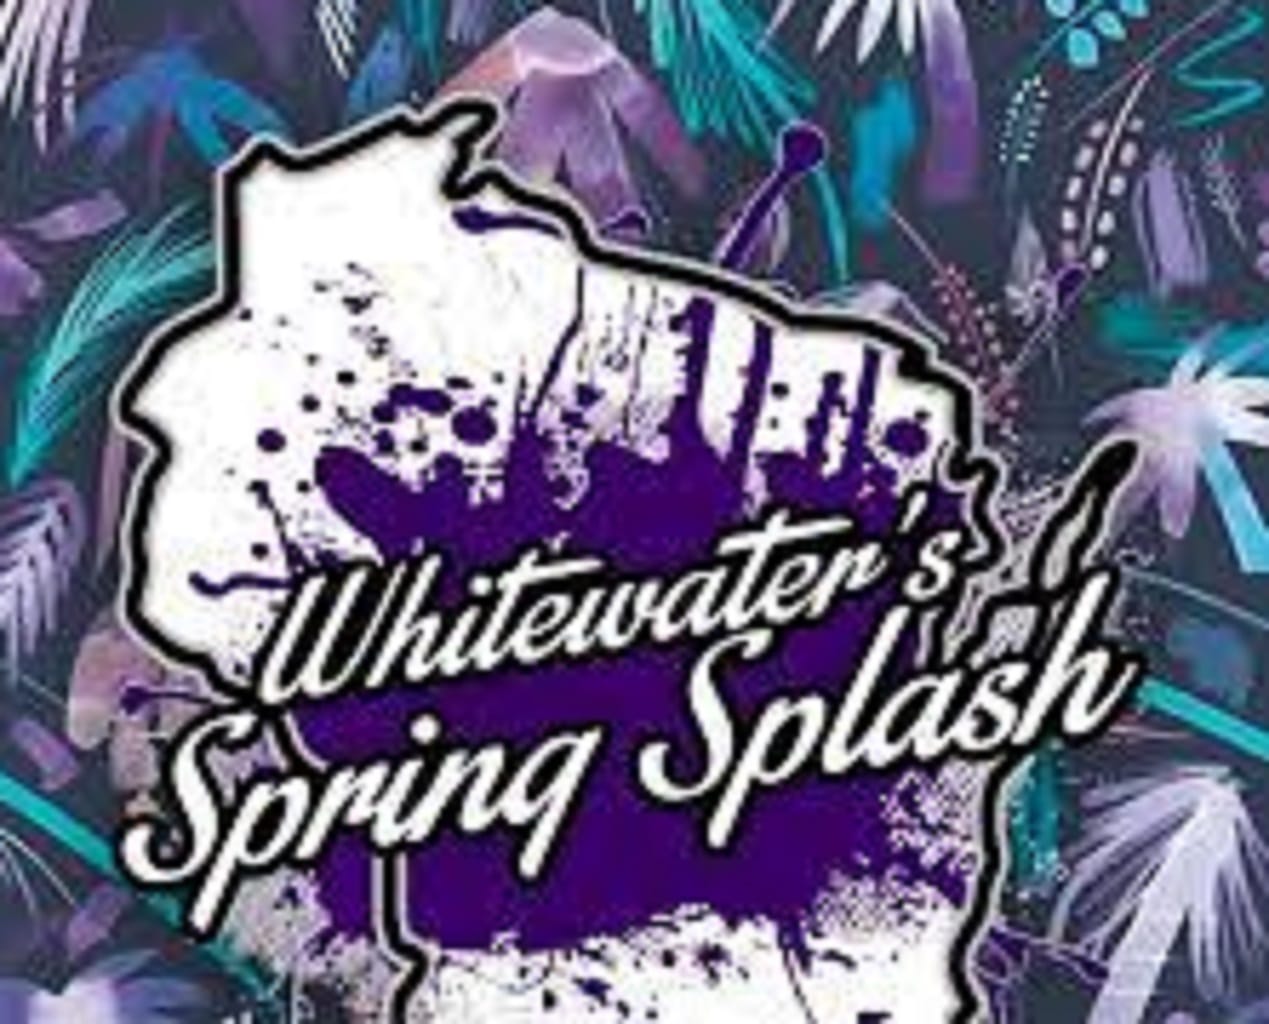 “Spring Splash” Returns With Fewer Incidents Whitewater Banner